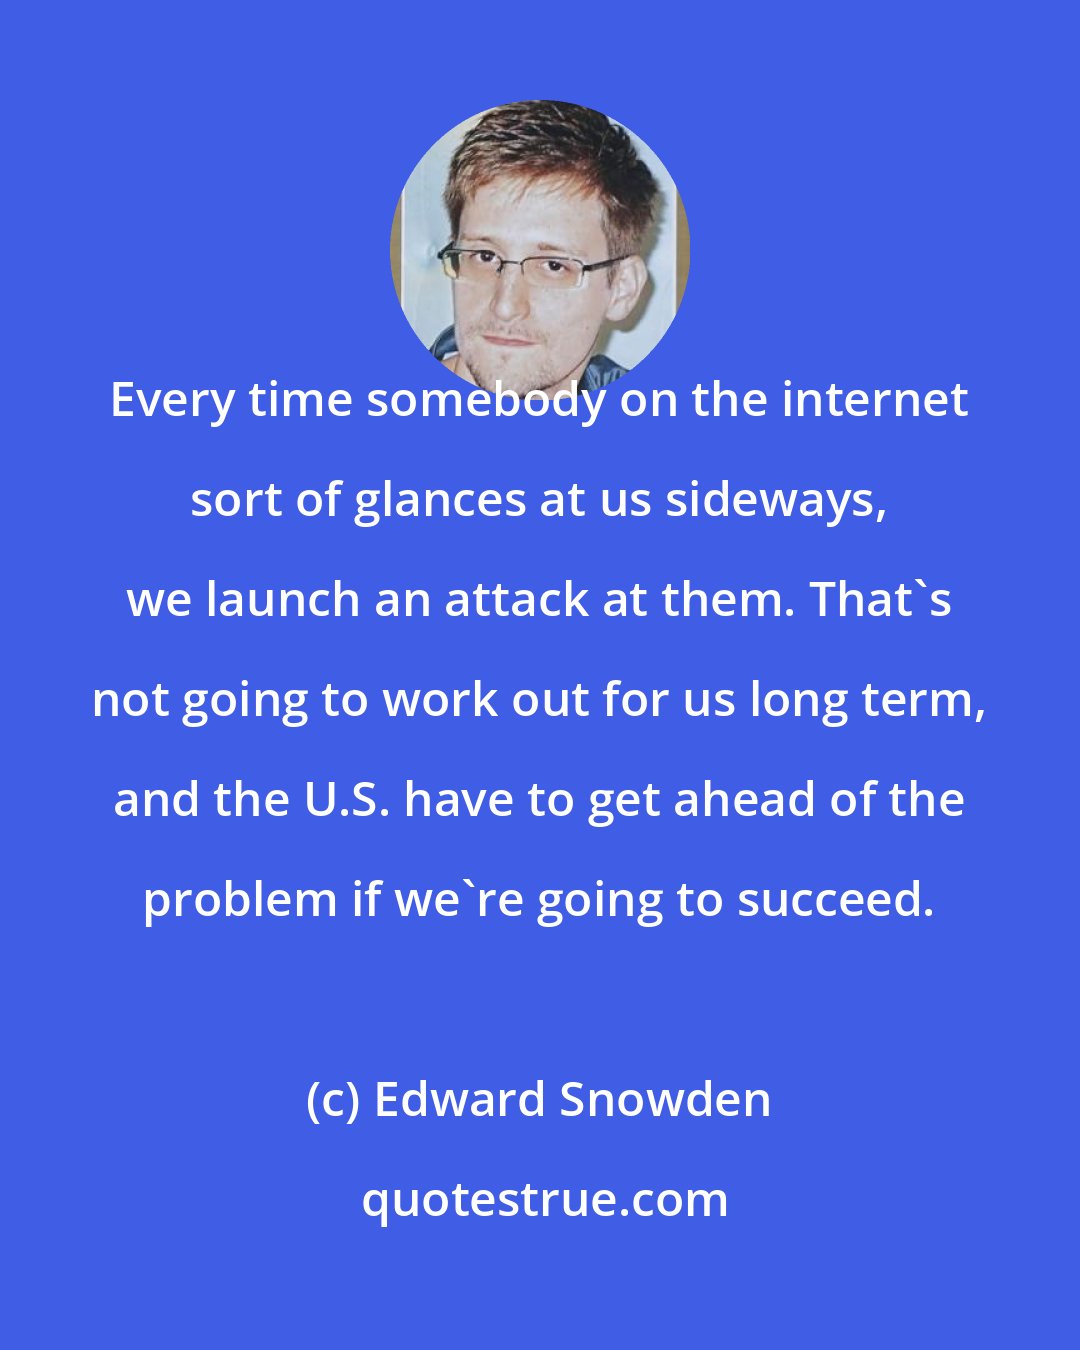 Edward Snowden: Every time somebody on the internet sort of glances at us sideways, we launch an attack at them. That's not going to work out for us long term, and the U.S. have to get ahead of the problem if we're going to succeed.